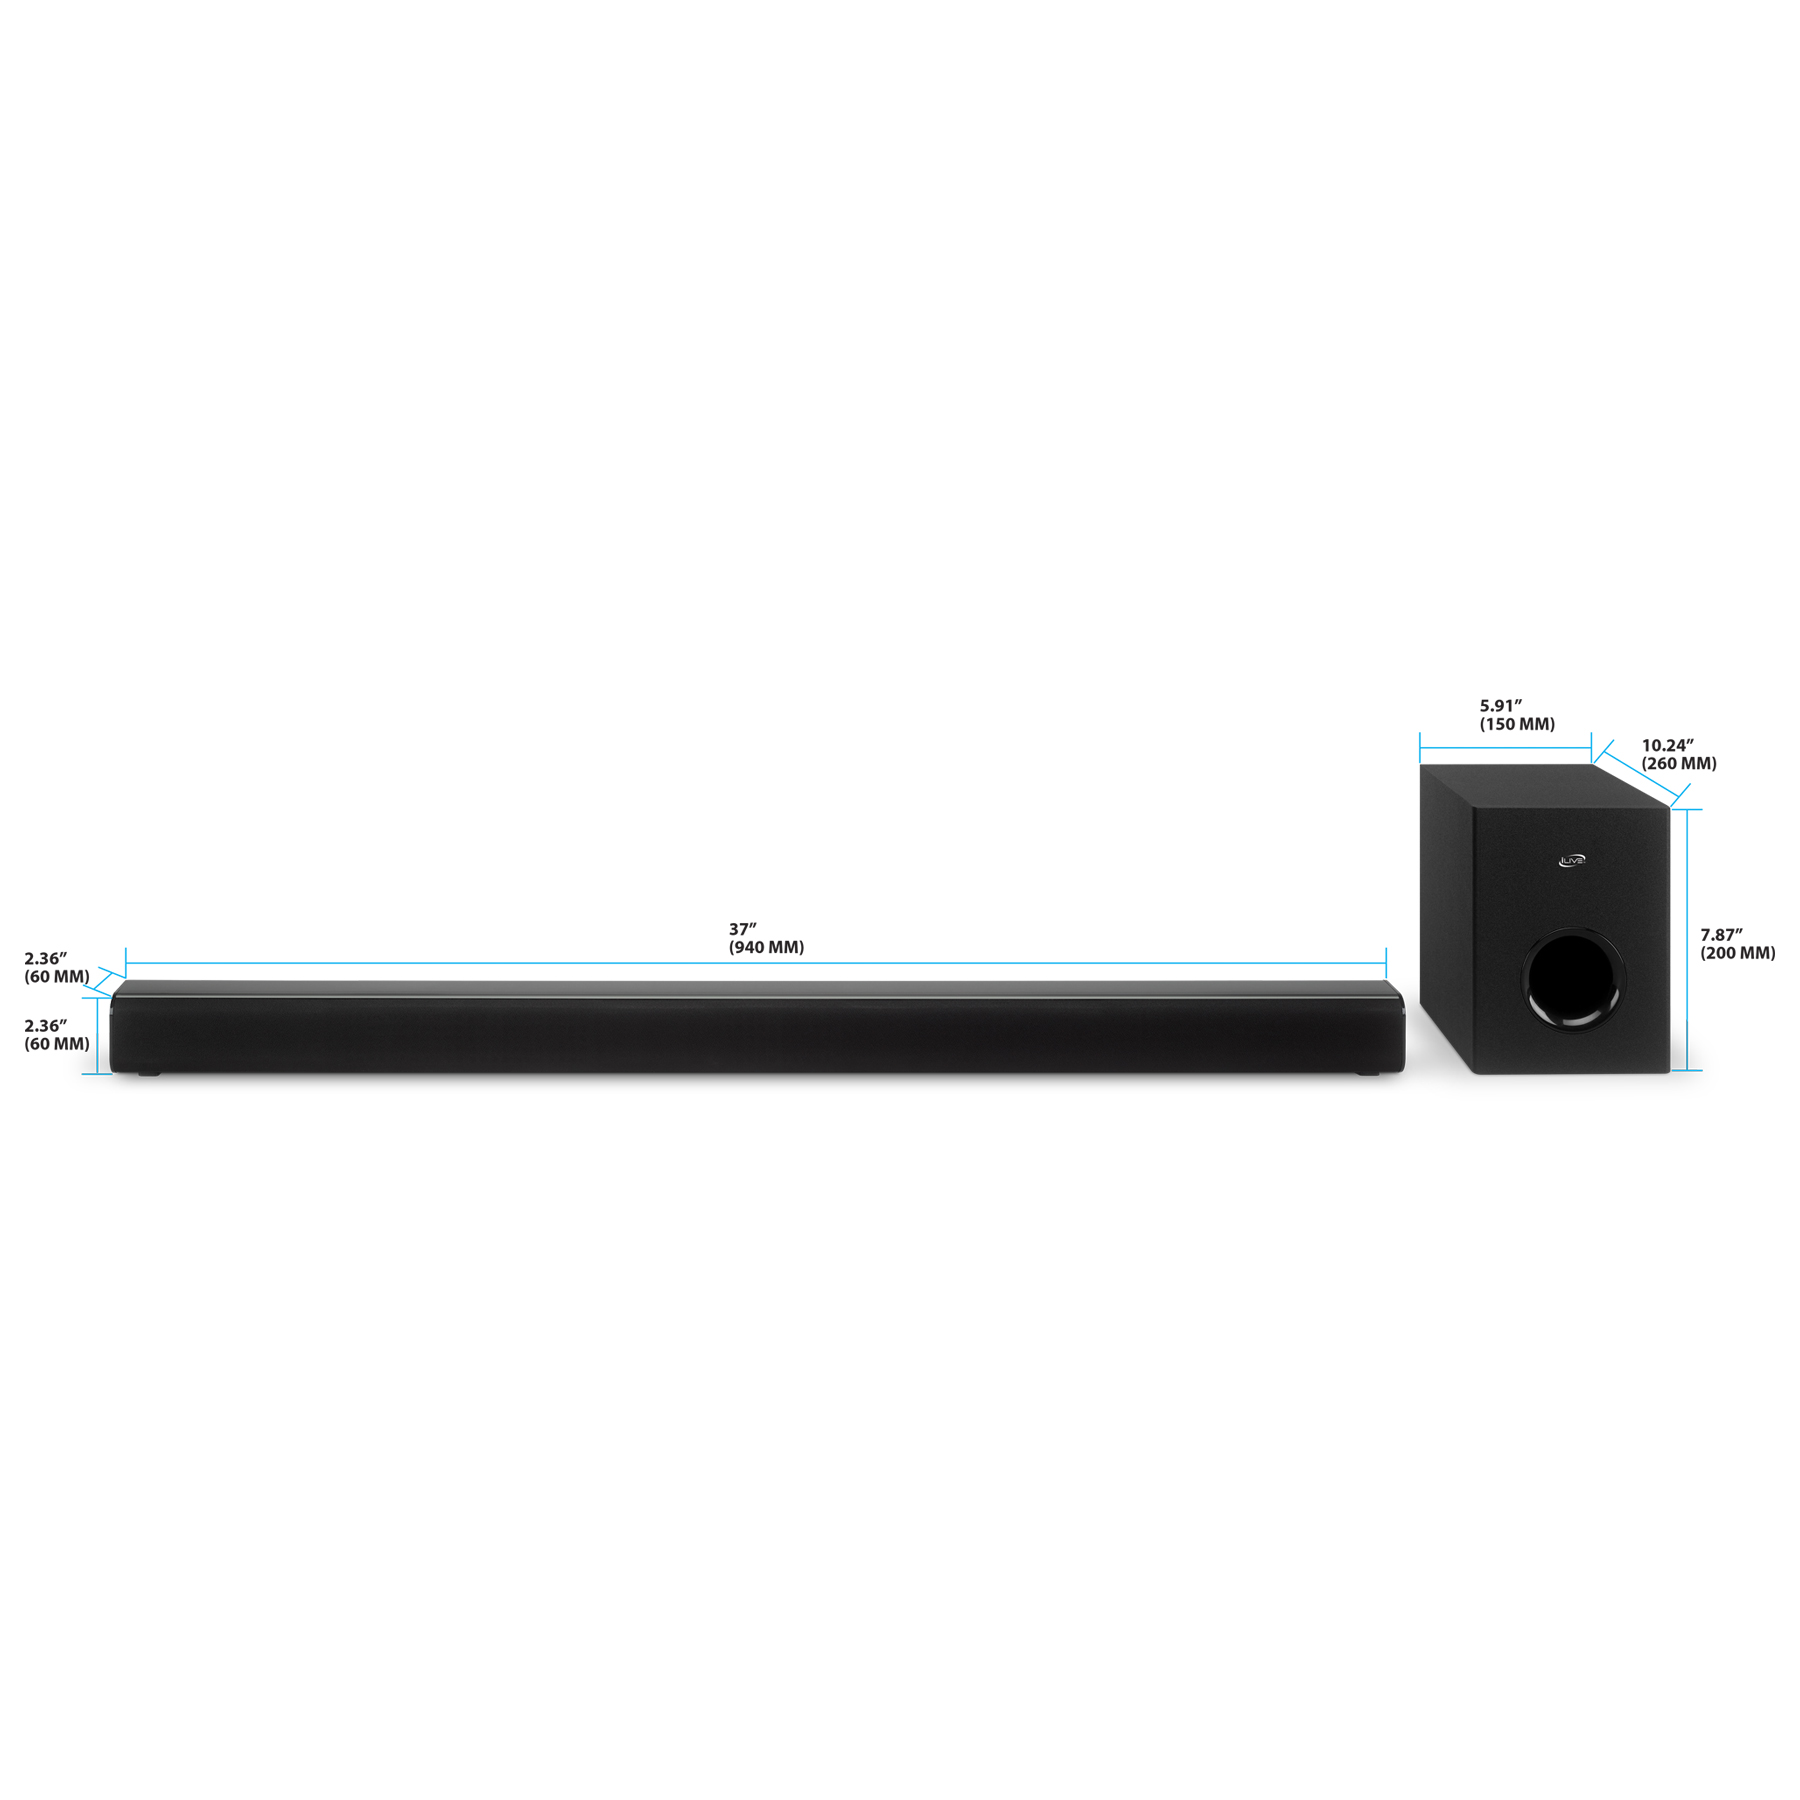 iLive 2.1 37" HD Soundbar and Wireless Subwoofer, ITBSW399B - image 3 of 6